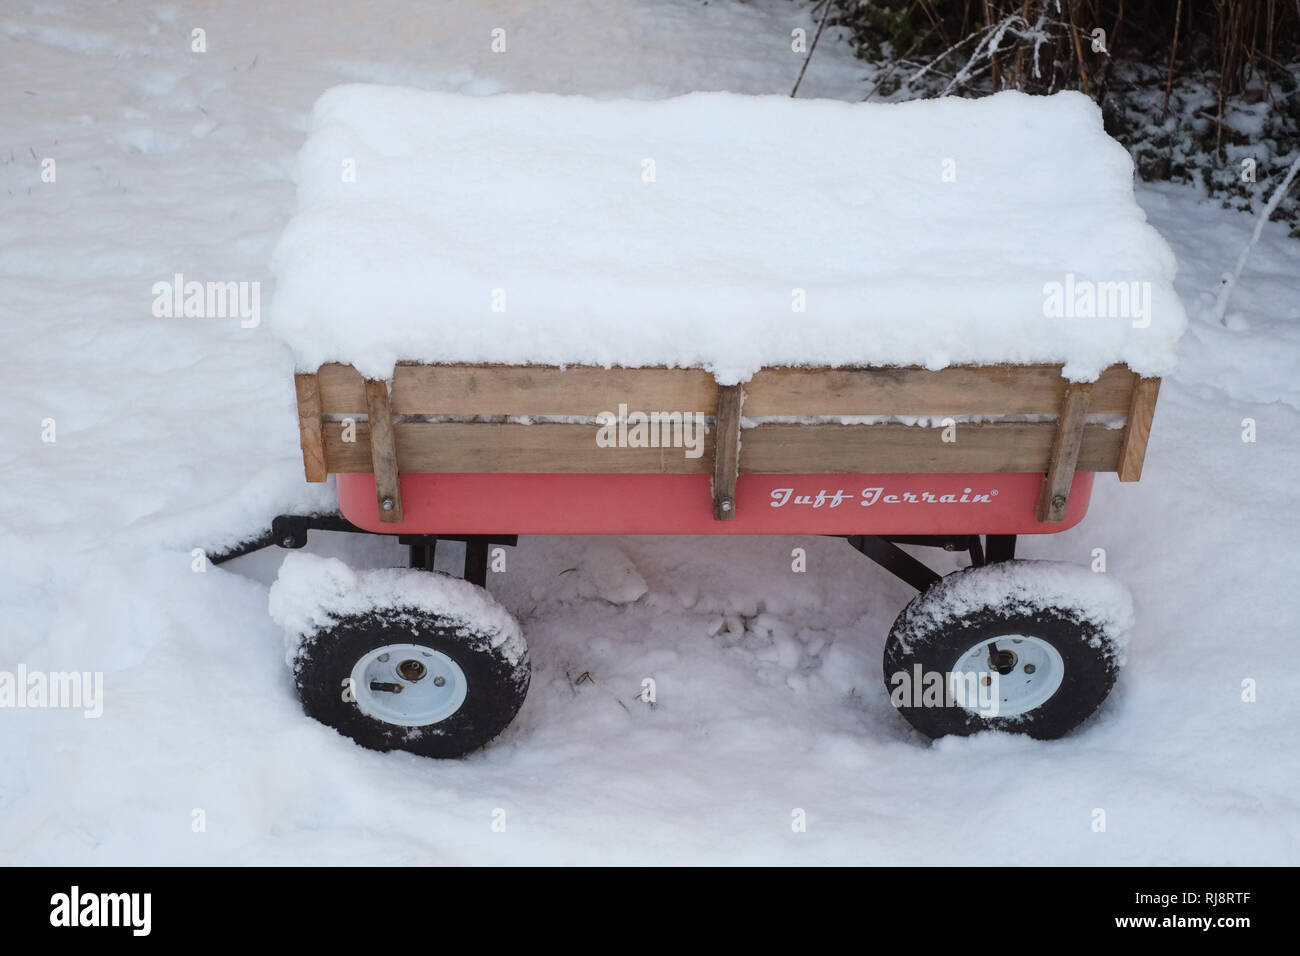 Hand cart or wagon covered in snow, Medstead, Alton, Hampshire, England ,United Kingdom. Stock Photo